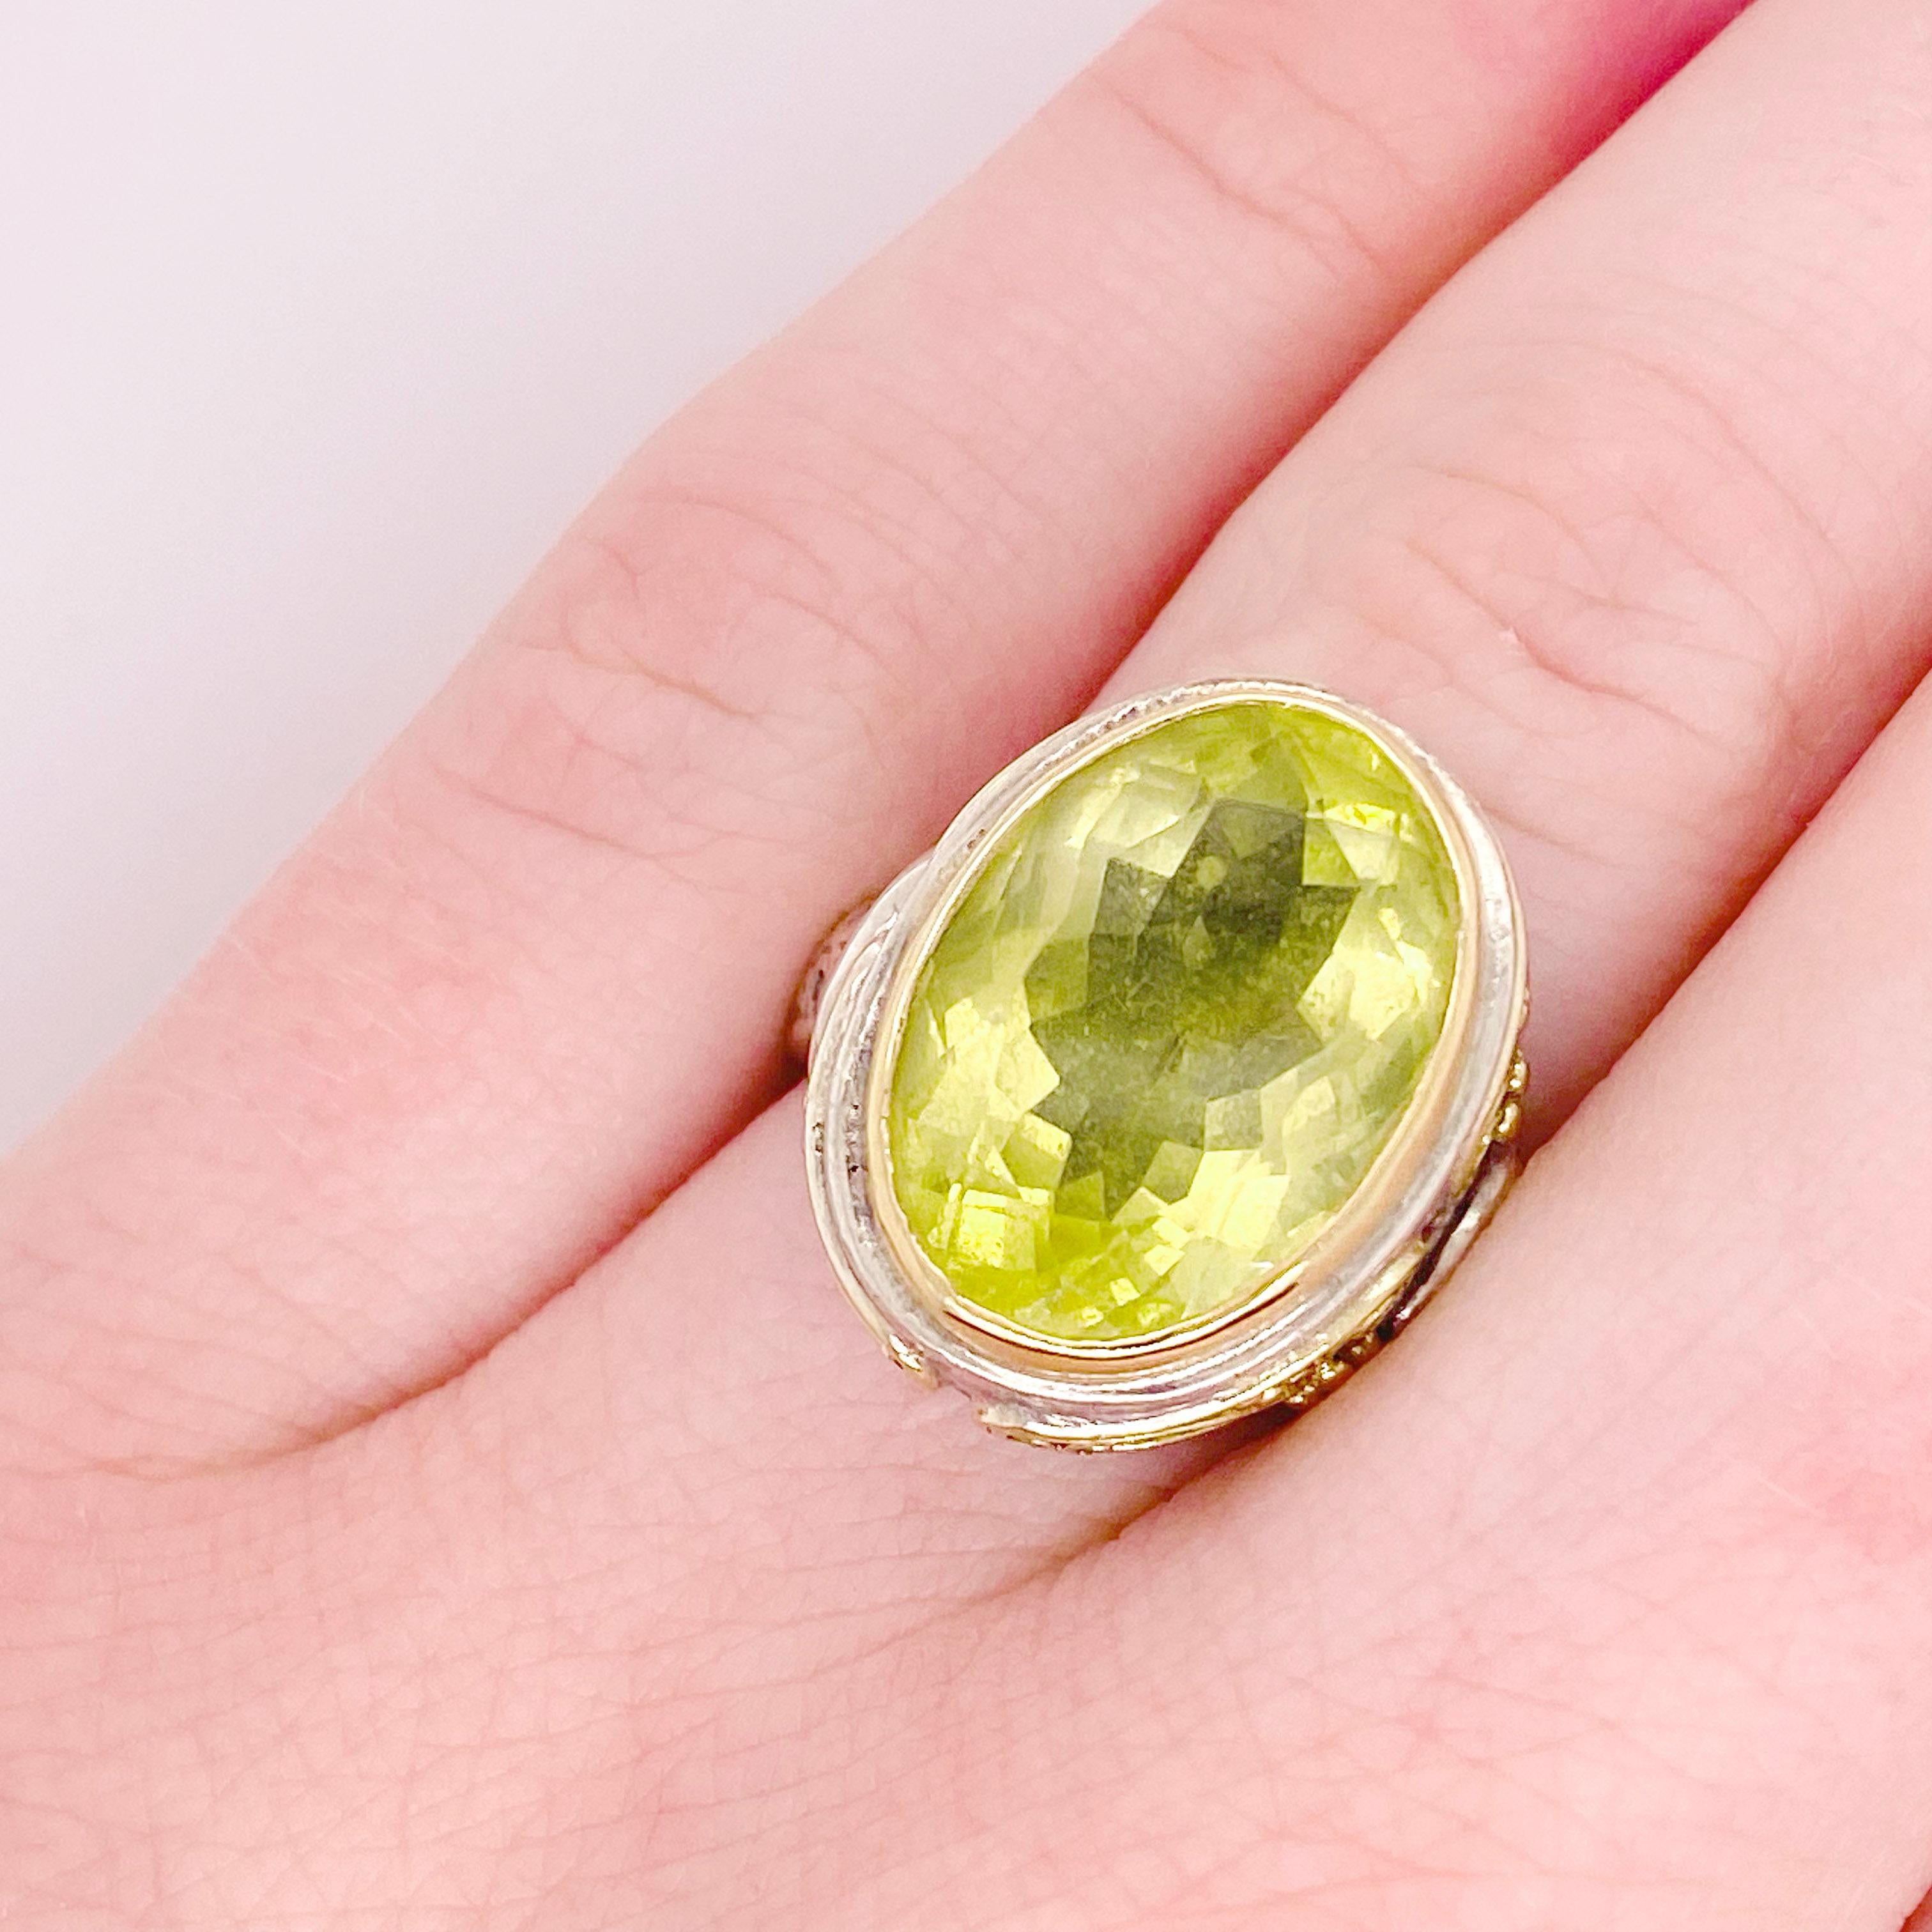 Konstantino is a famous jewelry designer from Greece. I had the wonderful opportunity of carrying the Konstantino Treasures’ line in my jewelry store. When I visited Greece, I picked up this ring to sell because it has a large lemon citrine with all